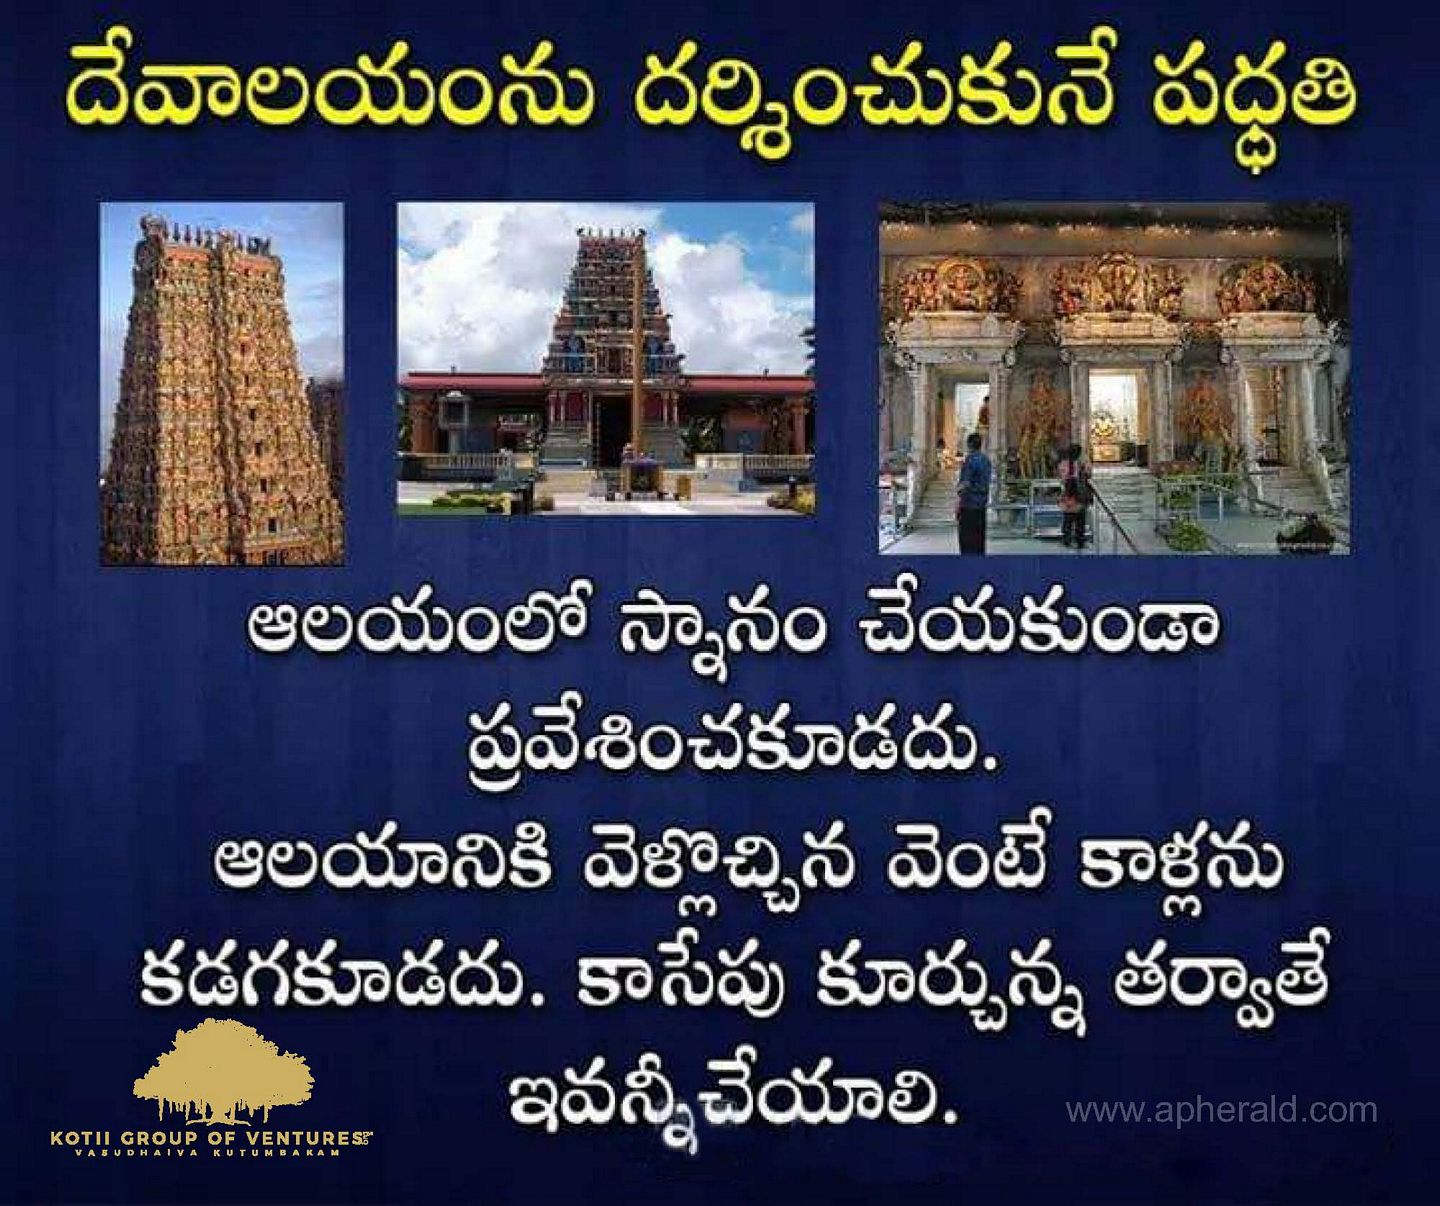 What Rules Should be Follow Hindu Temples